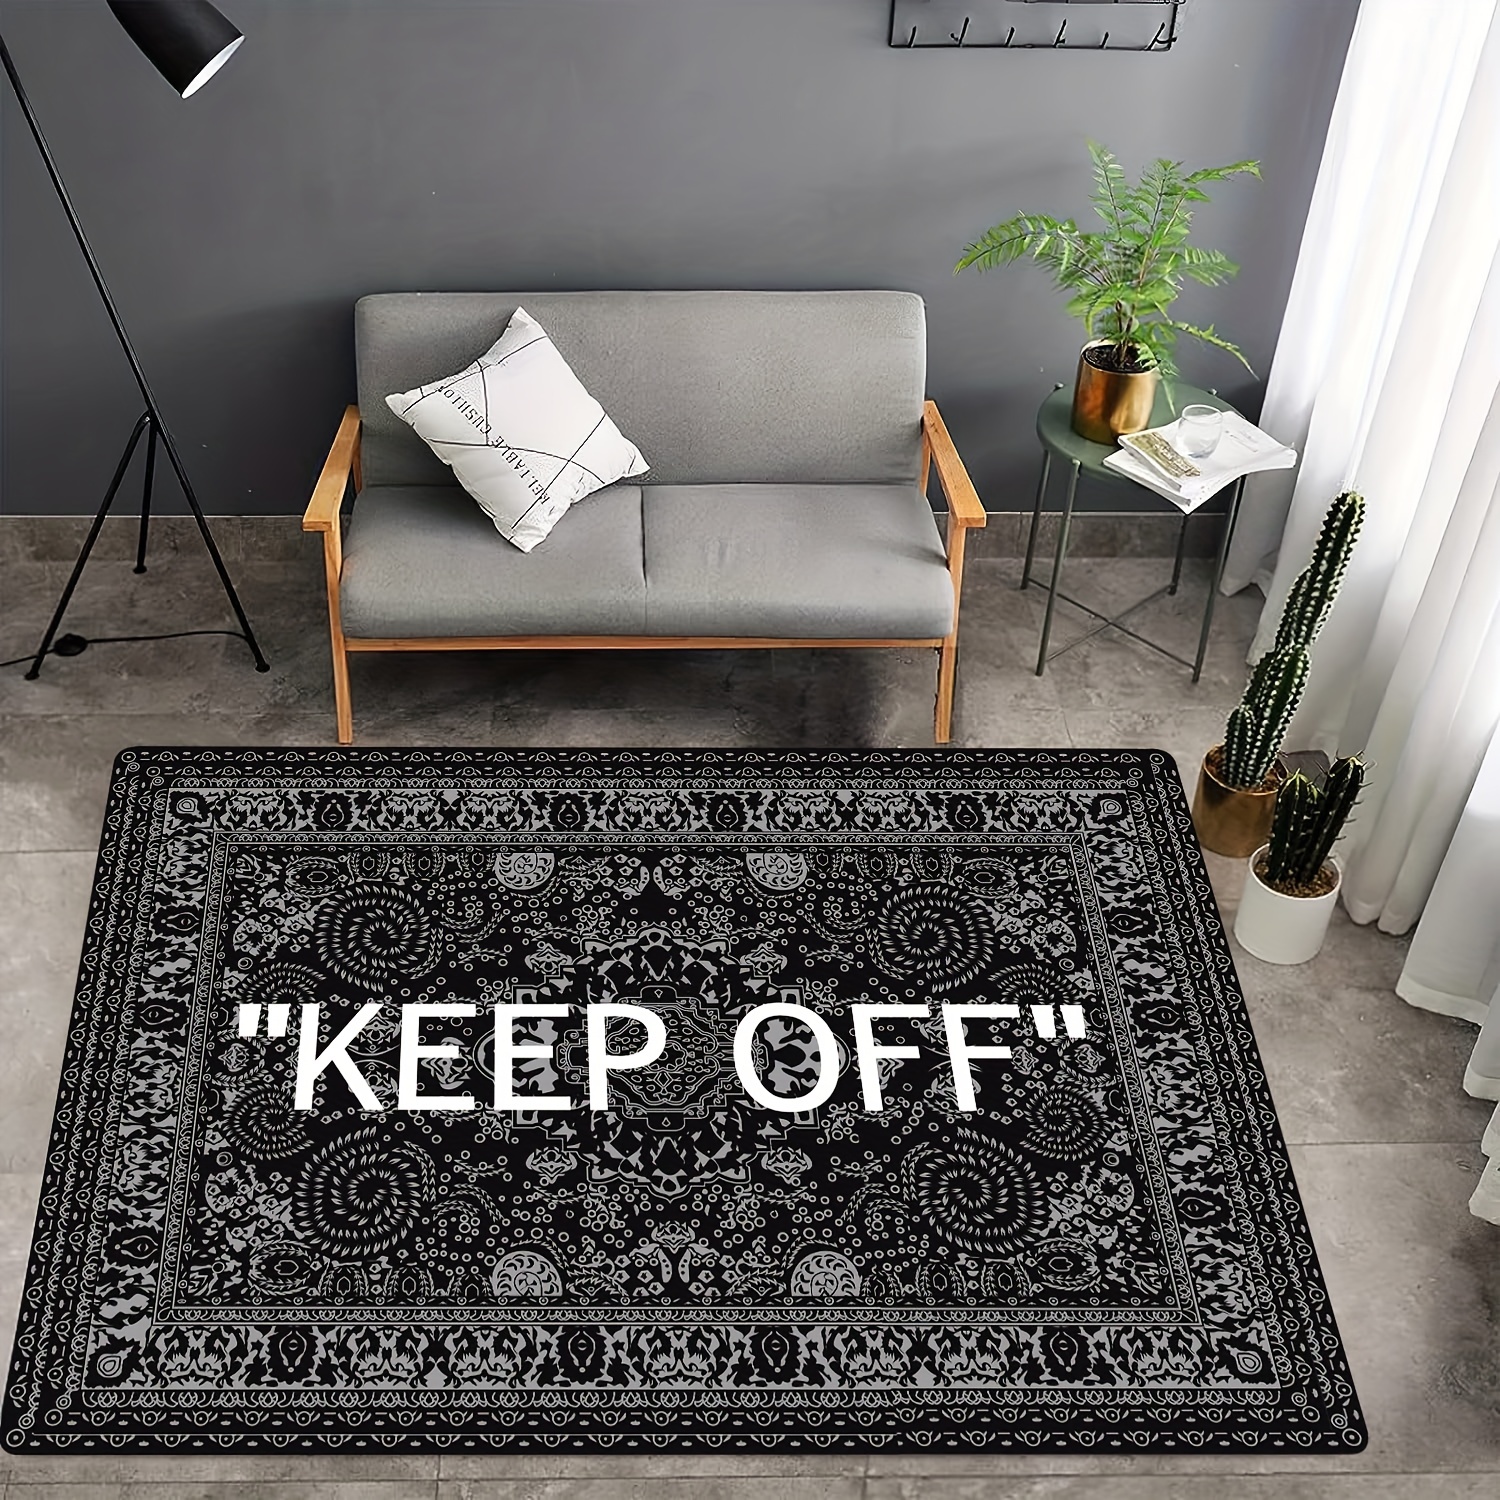 Keep Off, Off White Rug, Keepoff Pattern, Home Decor Rugs, Area